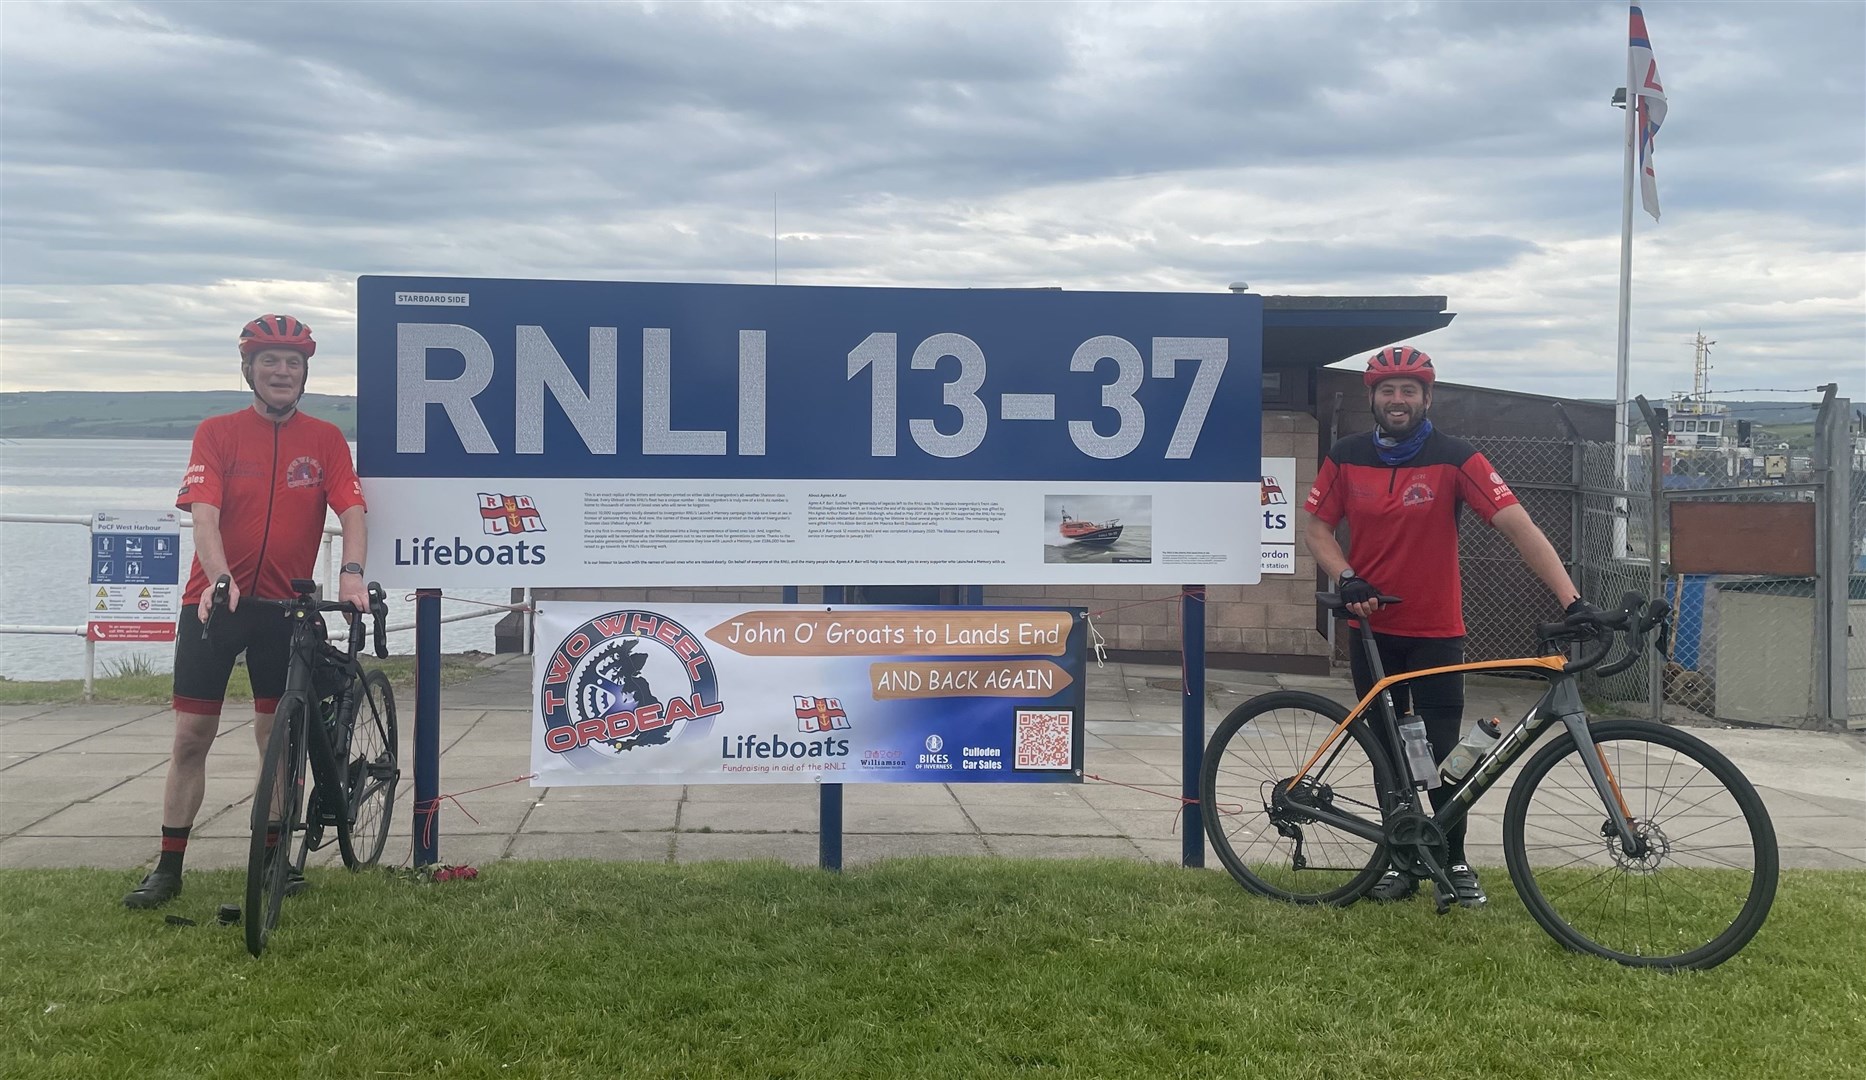 The duo popped in to see the Invergordon RNLI crew on their way south on the first day of the challenge.